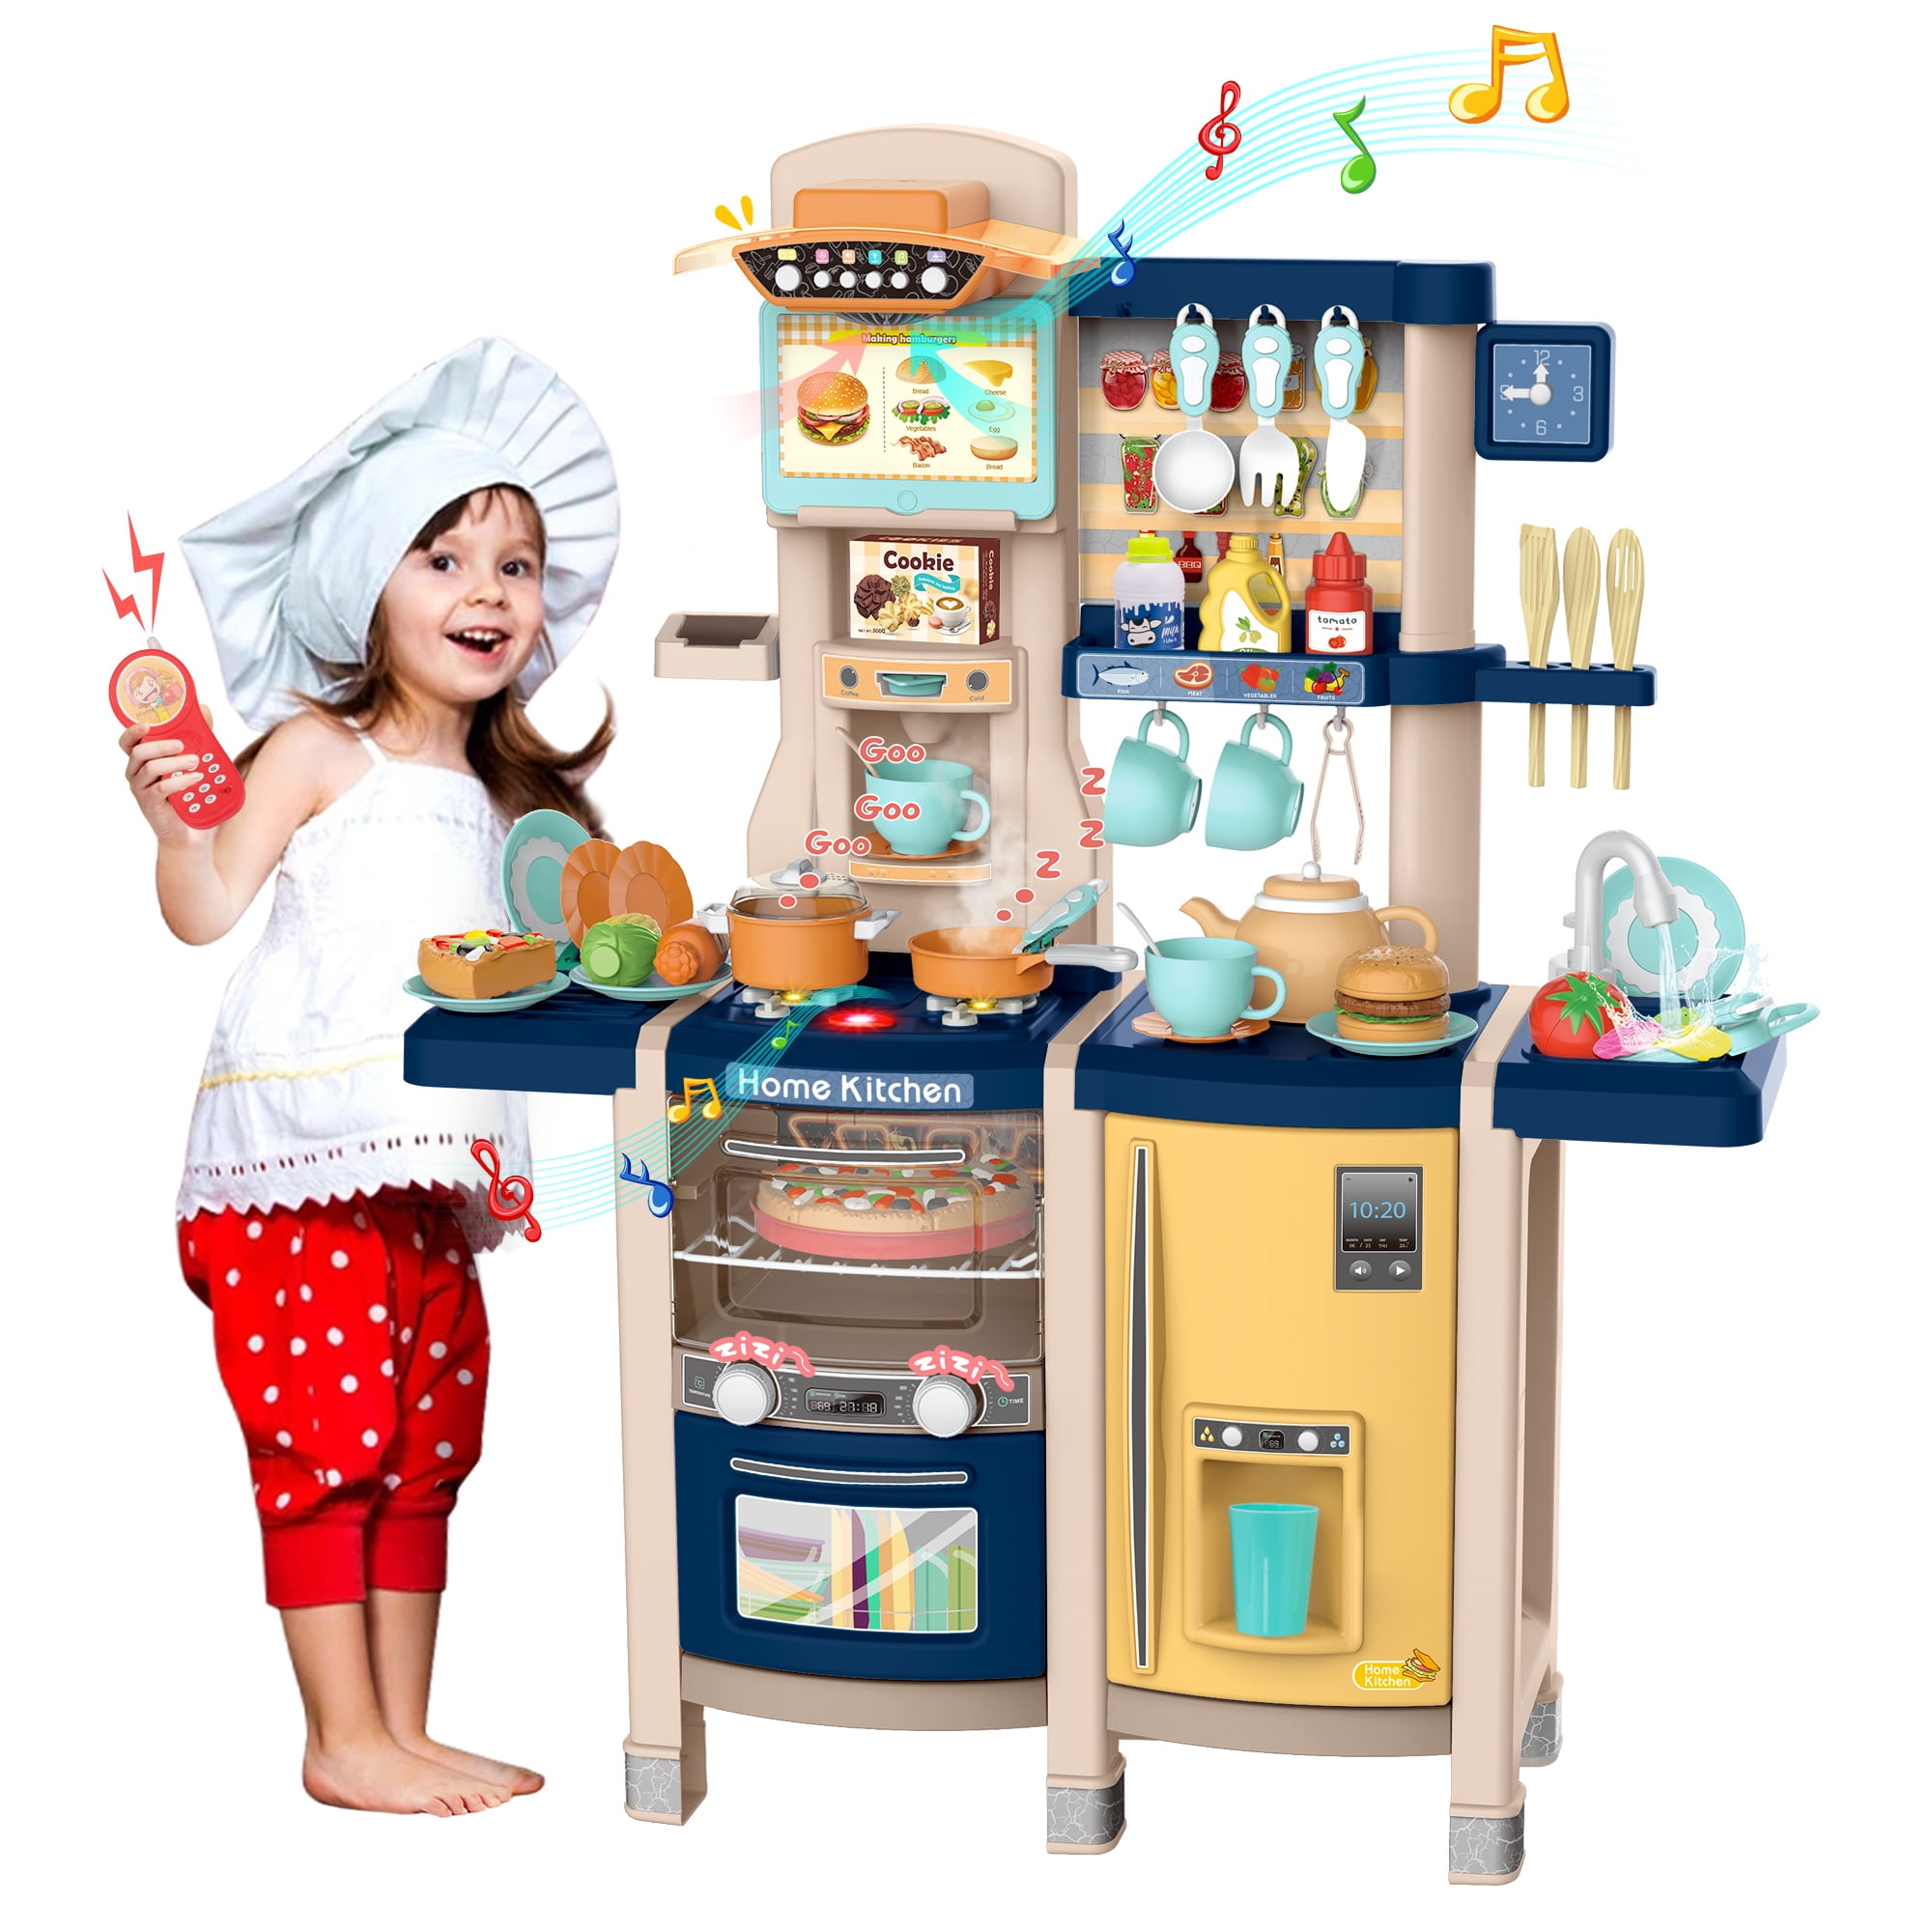 Chef Cook Occupation Fruit Salad Vegetable Kitchenware Pretend Play Girl Kid Toy 